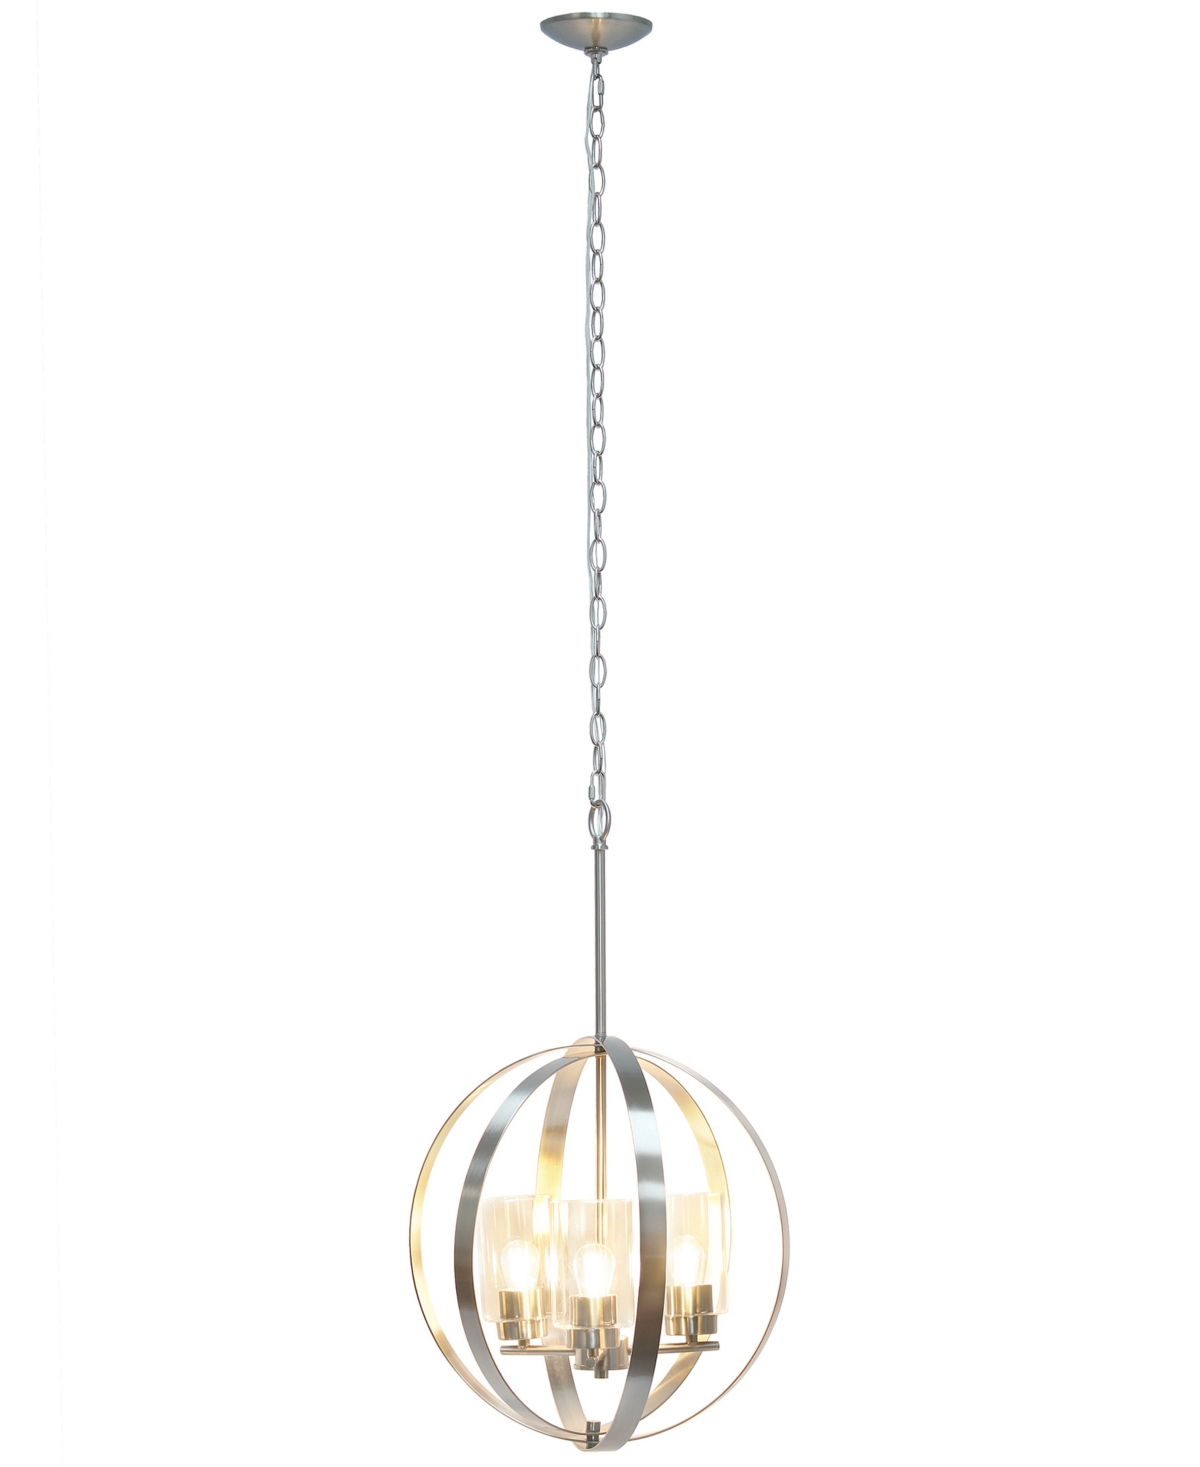 All The Rages 3-light 18" Adjustable Industrial Globe Hanging Metal And Clear Glass Ceiling Pendant In Brushed Nickel